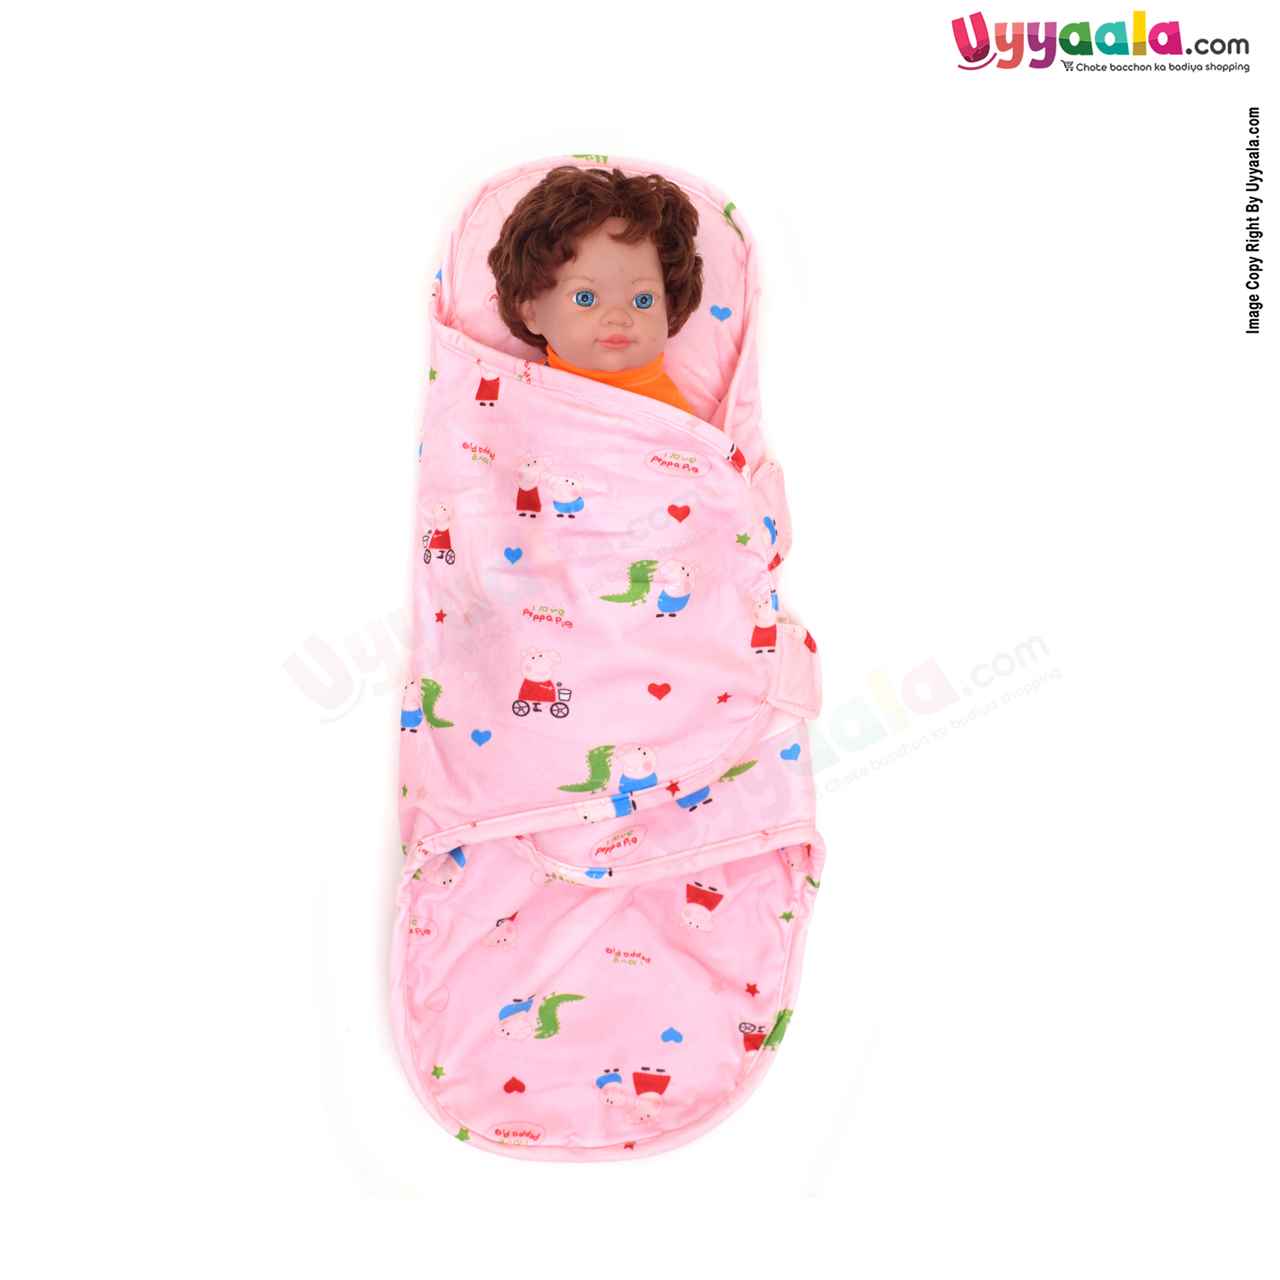 Swaddle Wrapper With Back, Neck & Head Support Newborn Babies - Pink 0-6m